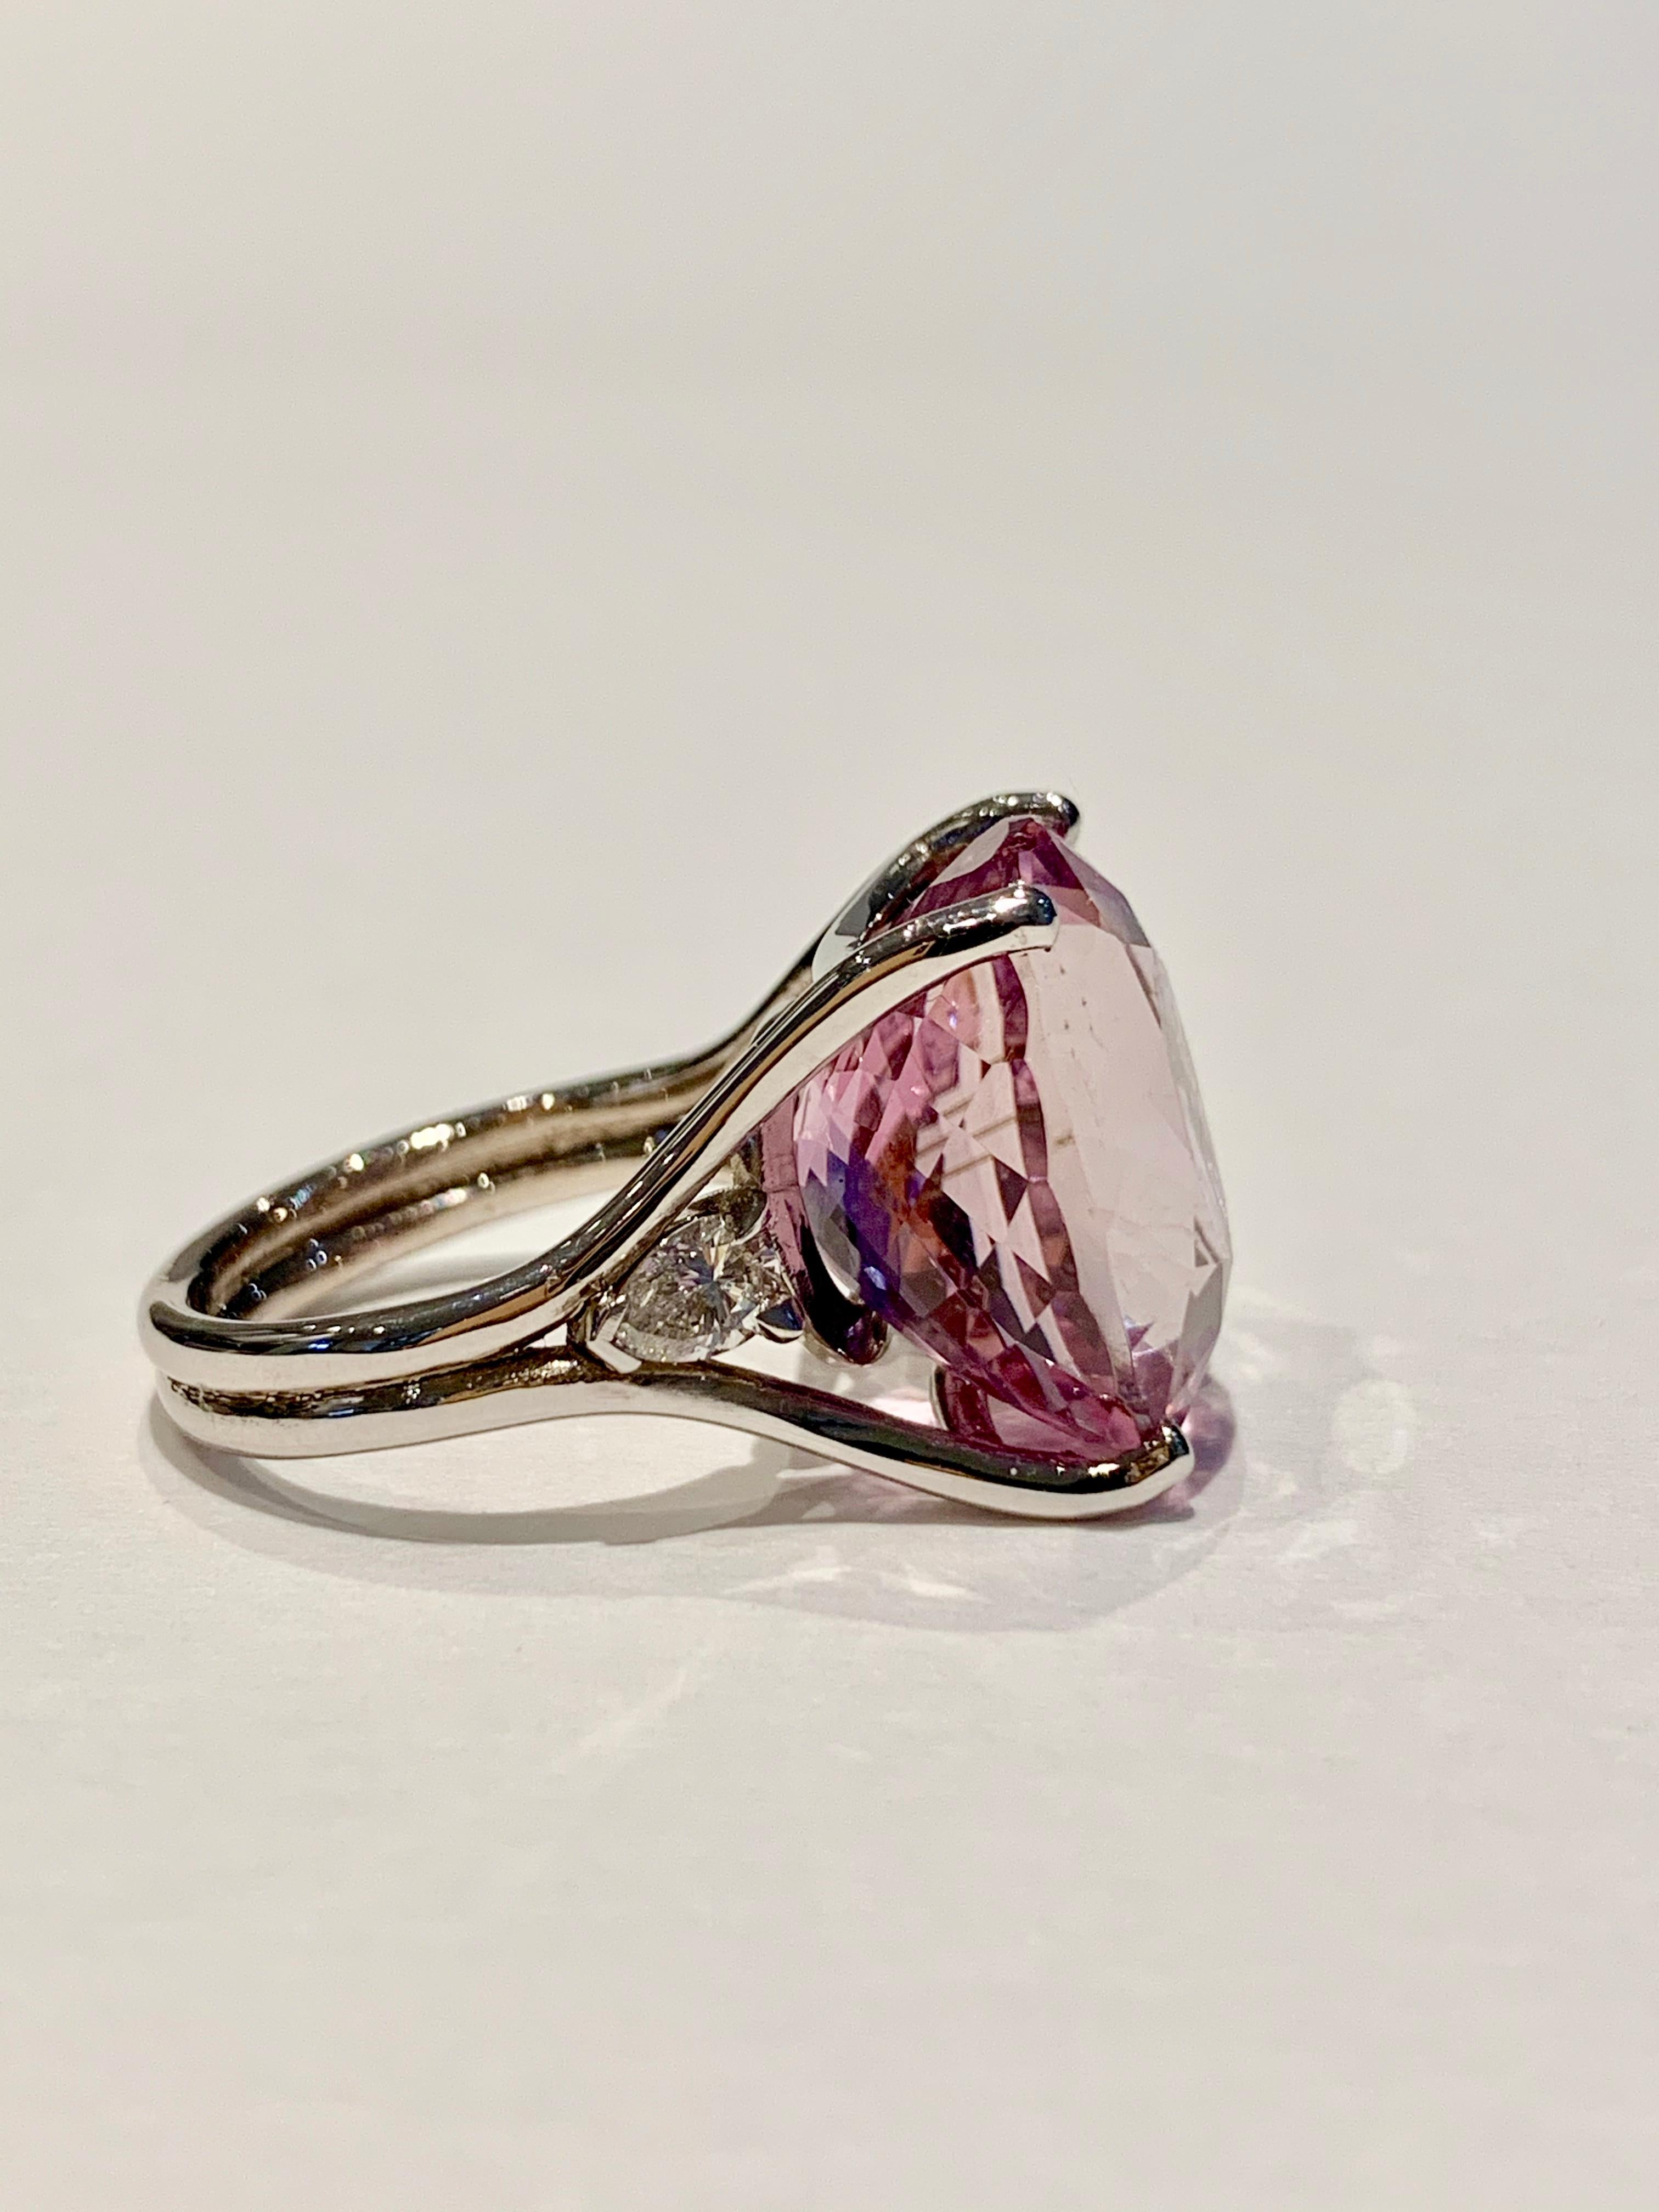 Women's Bespoke 18 Carat Pink Oval Kunzite and Diamond Ring in 18 Carat White Gold For Sale